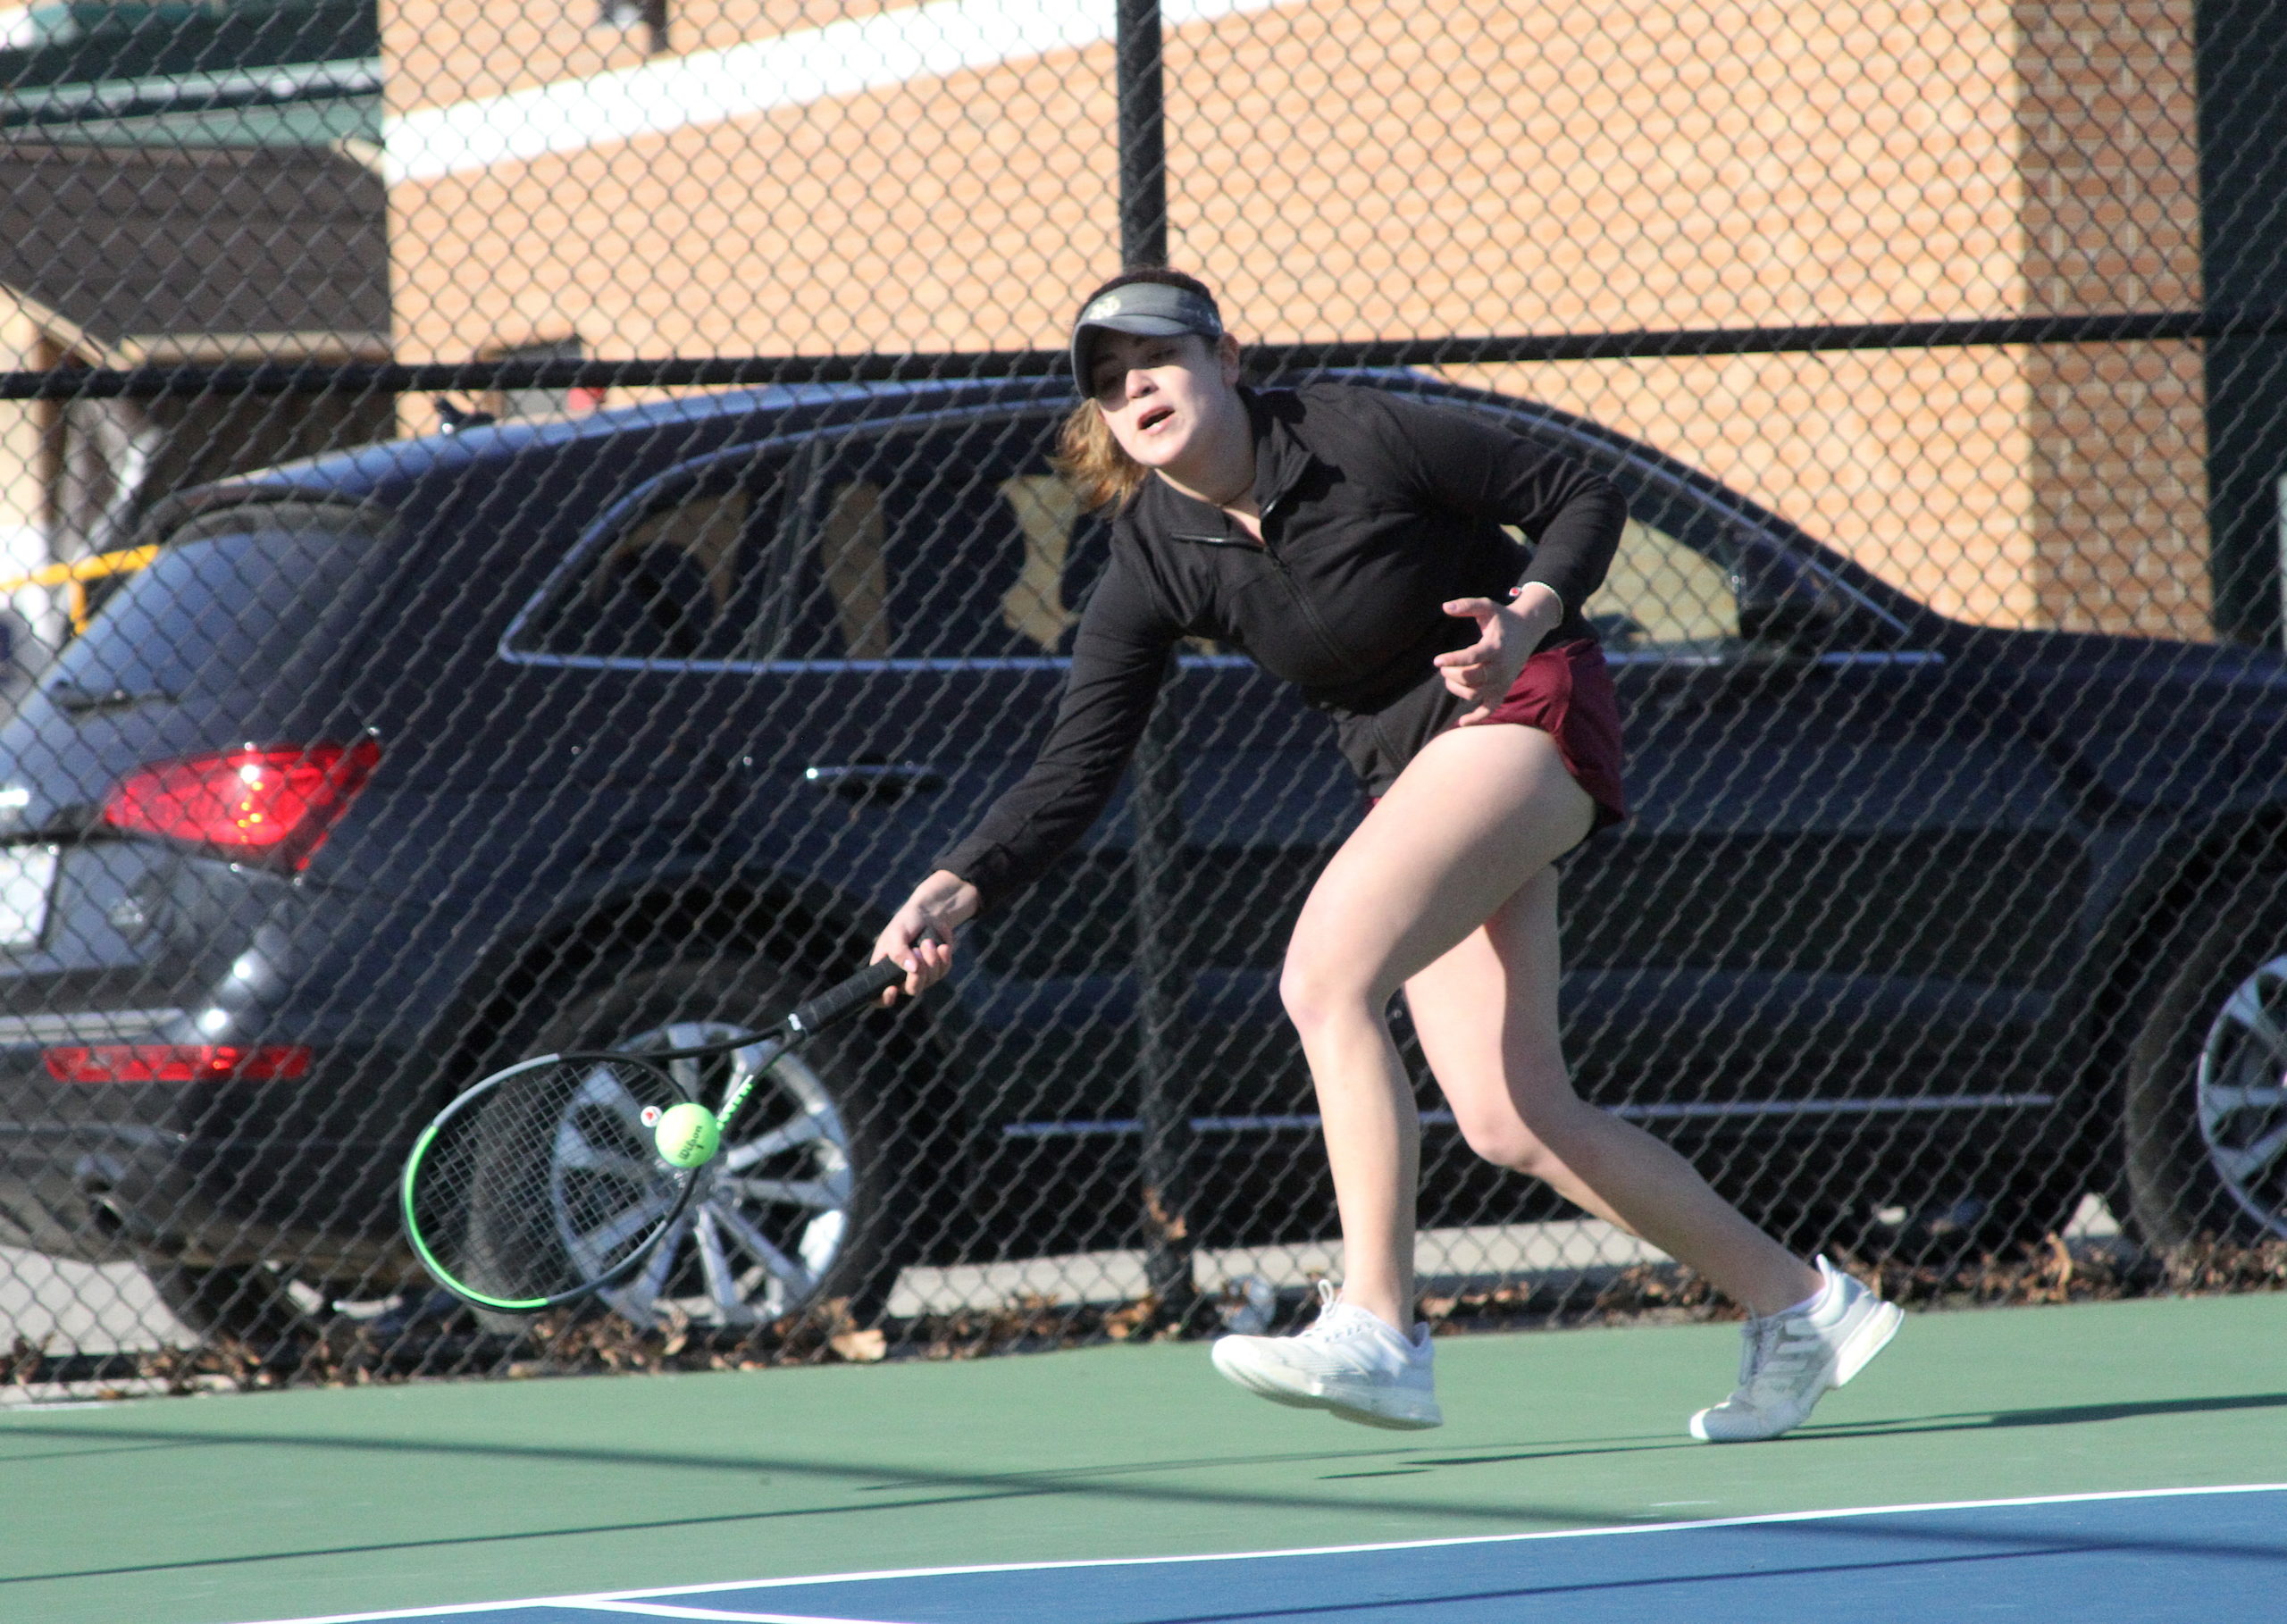 Sandrine Becht was one of two All-State players for the East Hampton/Pierson/Bridgehampton girls tennis team this past fall.